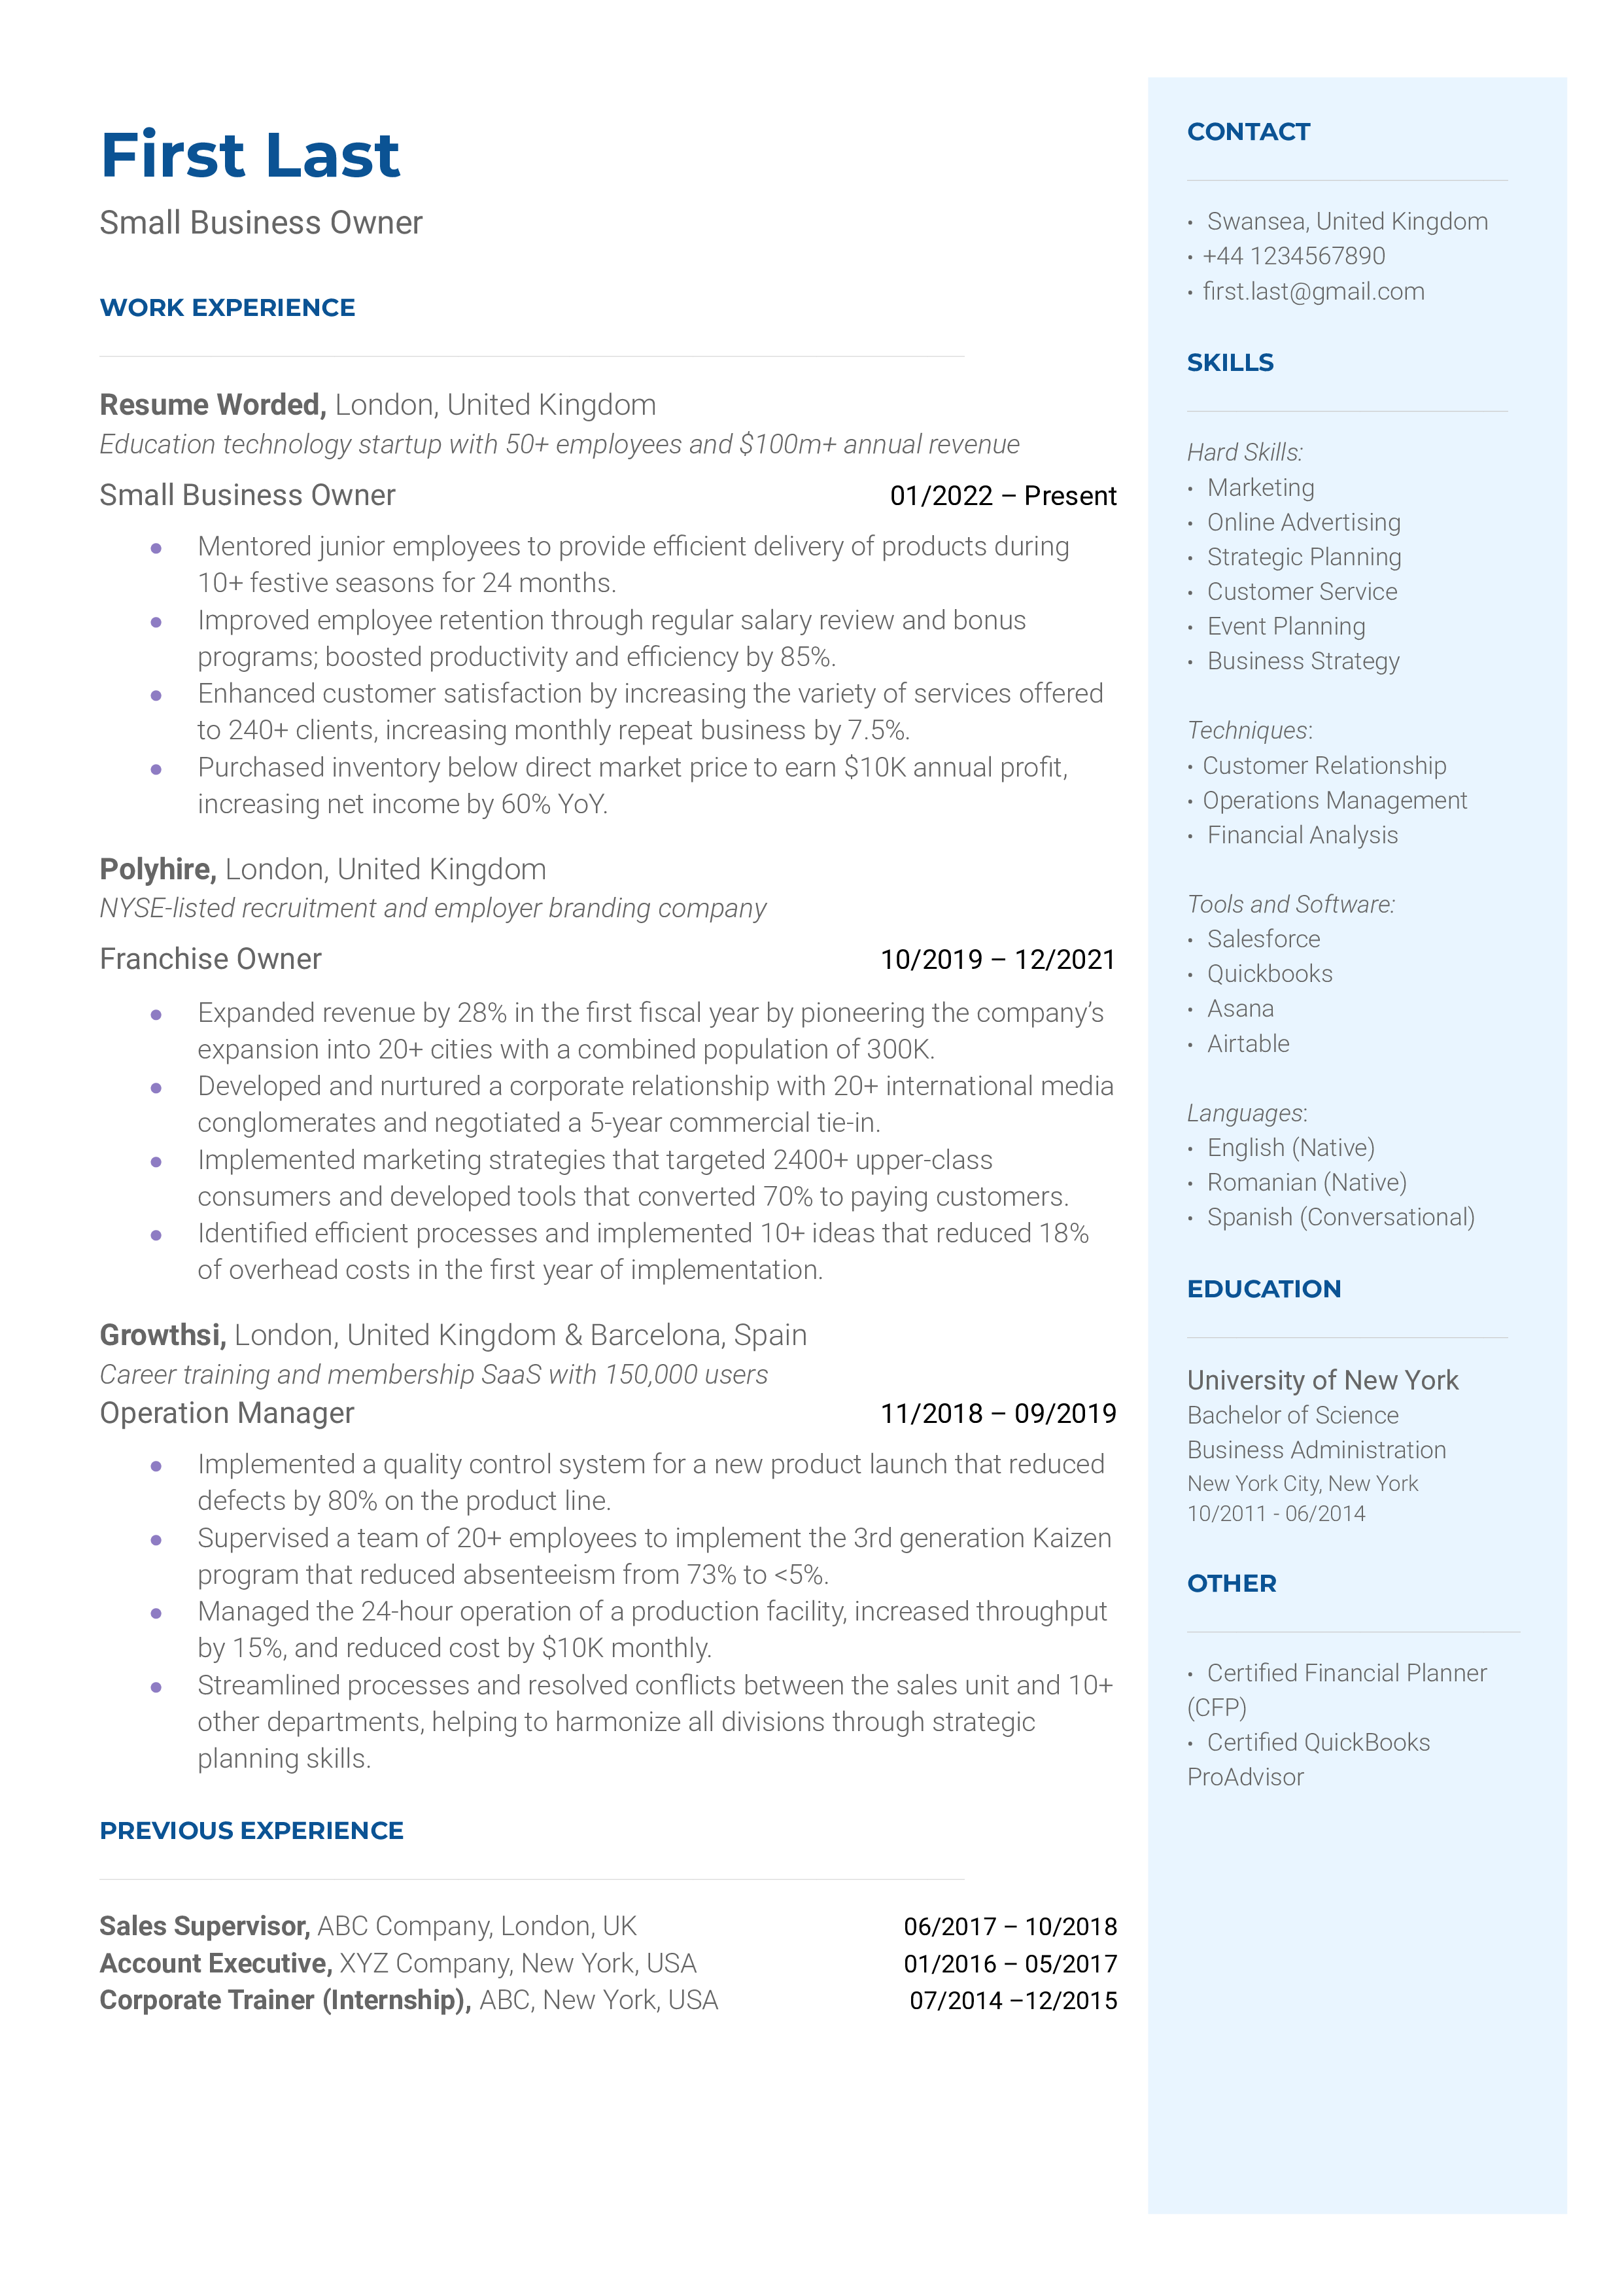 A small business owner's CV showcasing entrepreneurship skills and financial competence.